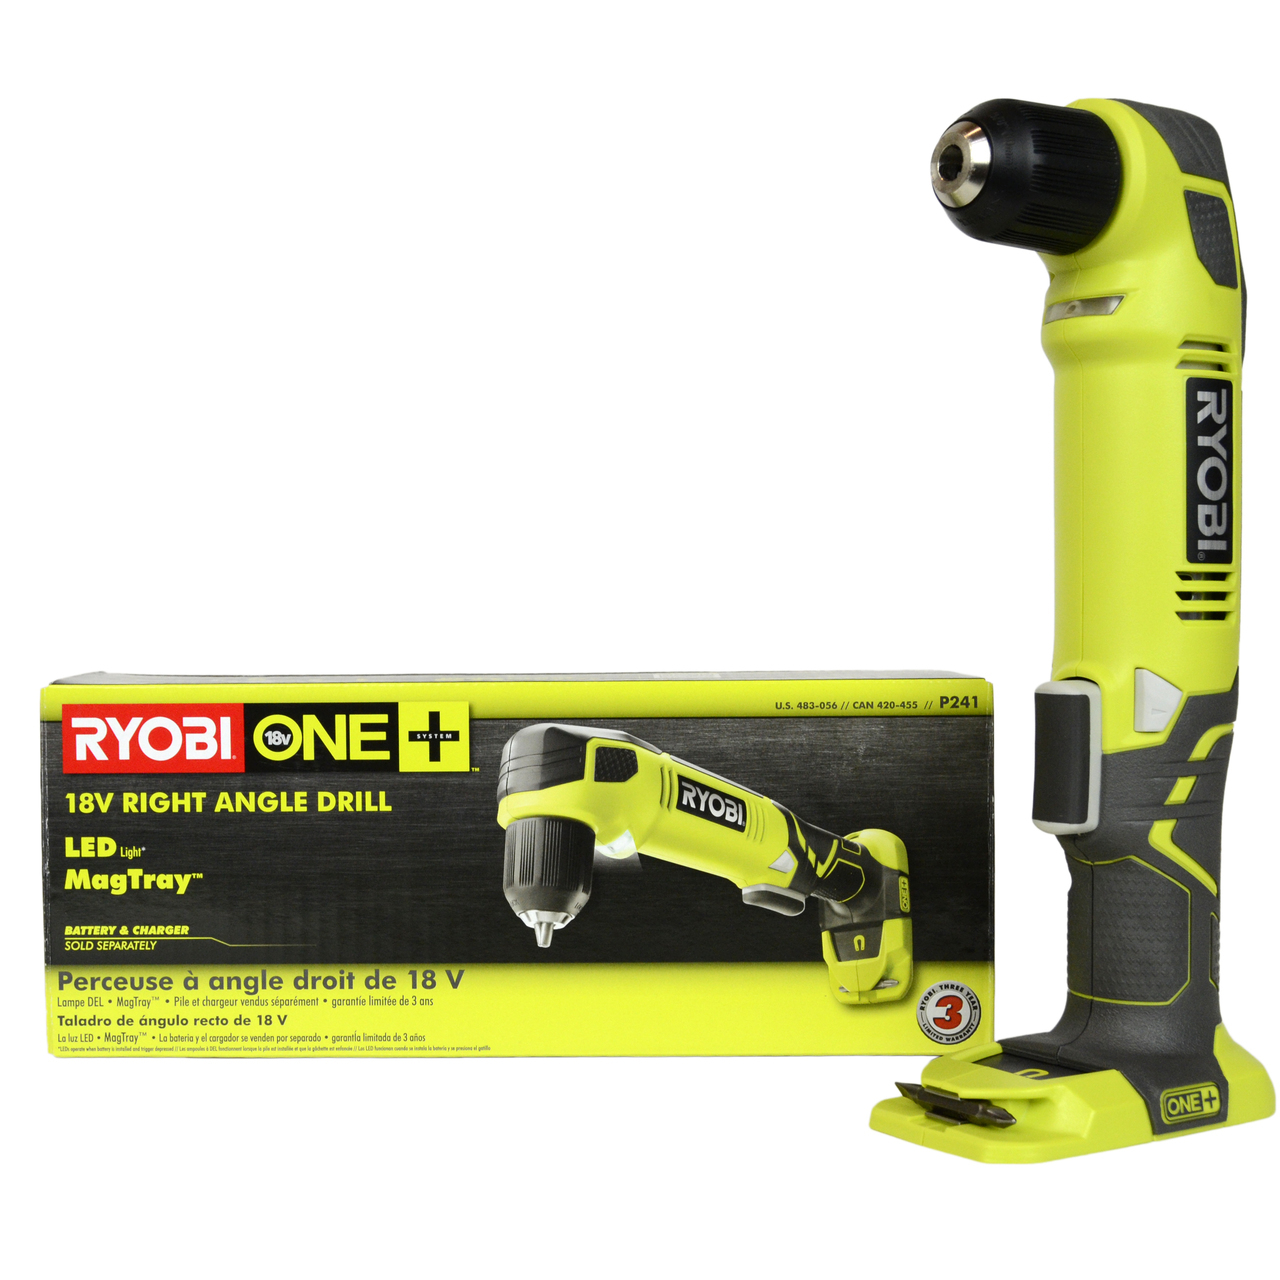 Ryobi P241 18V ONE+ 3/8 in. Right Angle Drill (Tool Only) | eBay